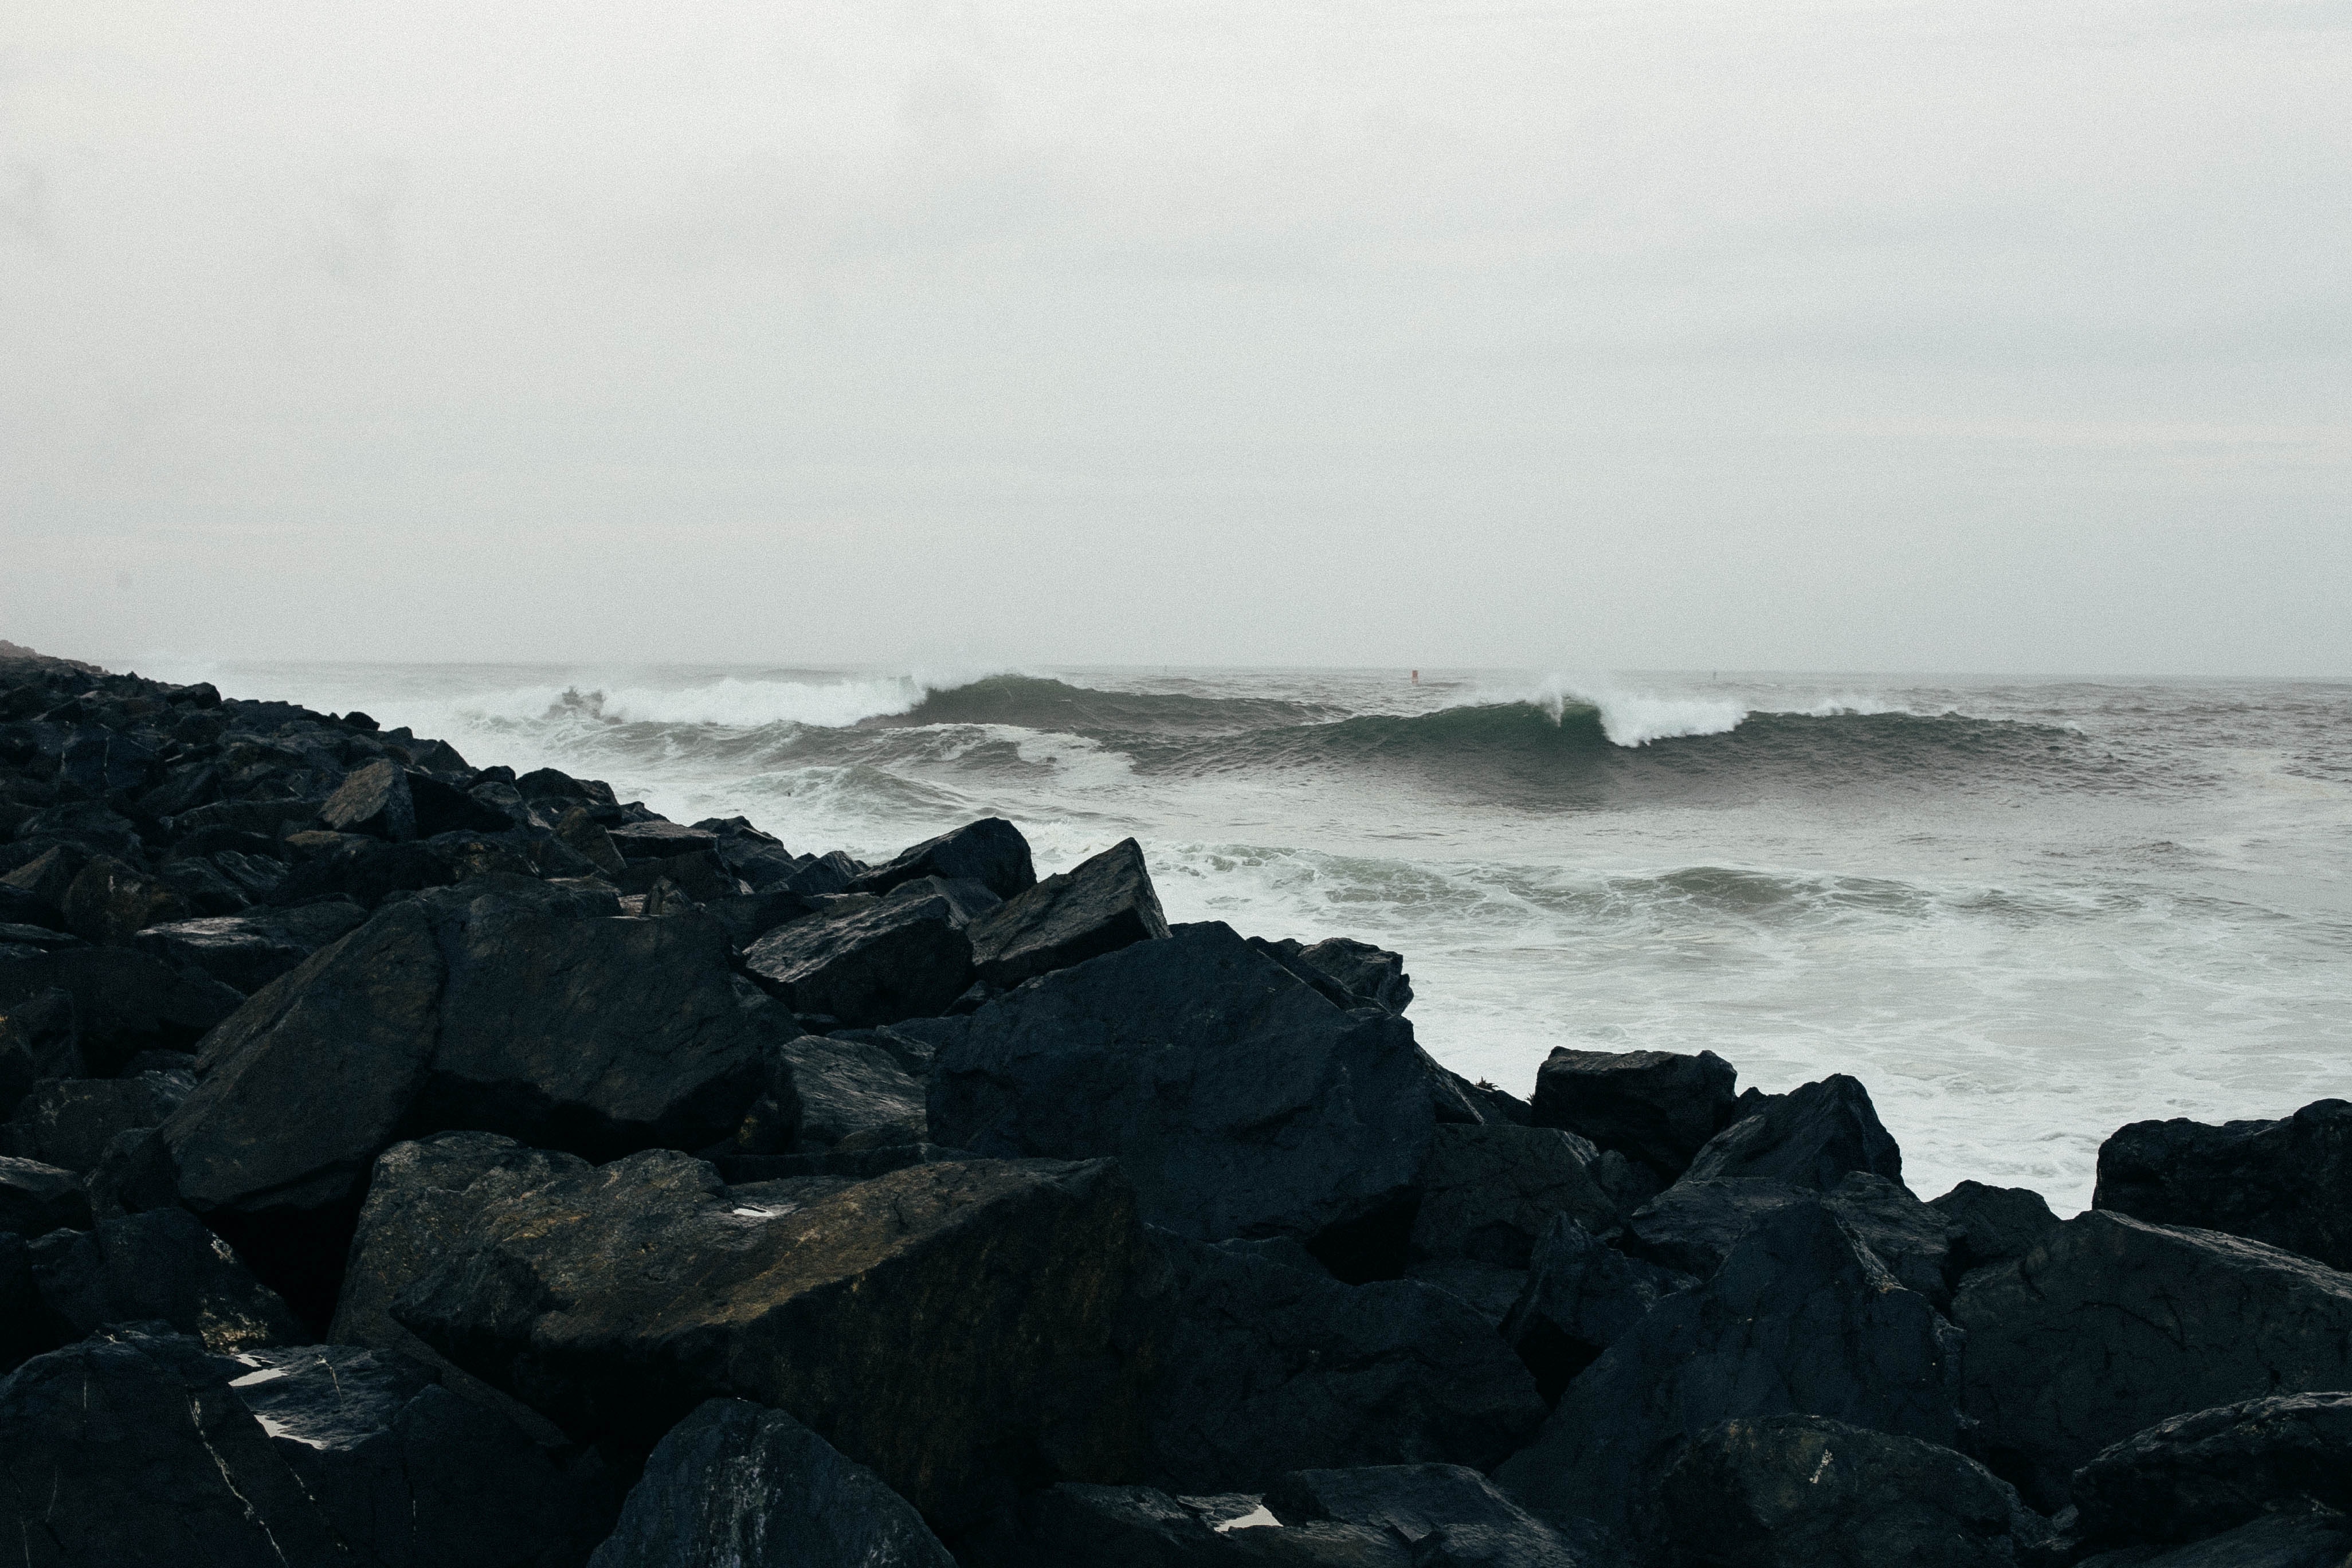 Dark stormy ocean and rocks. Image author unattributed under Creative Commons free use